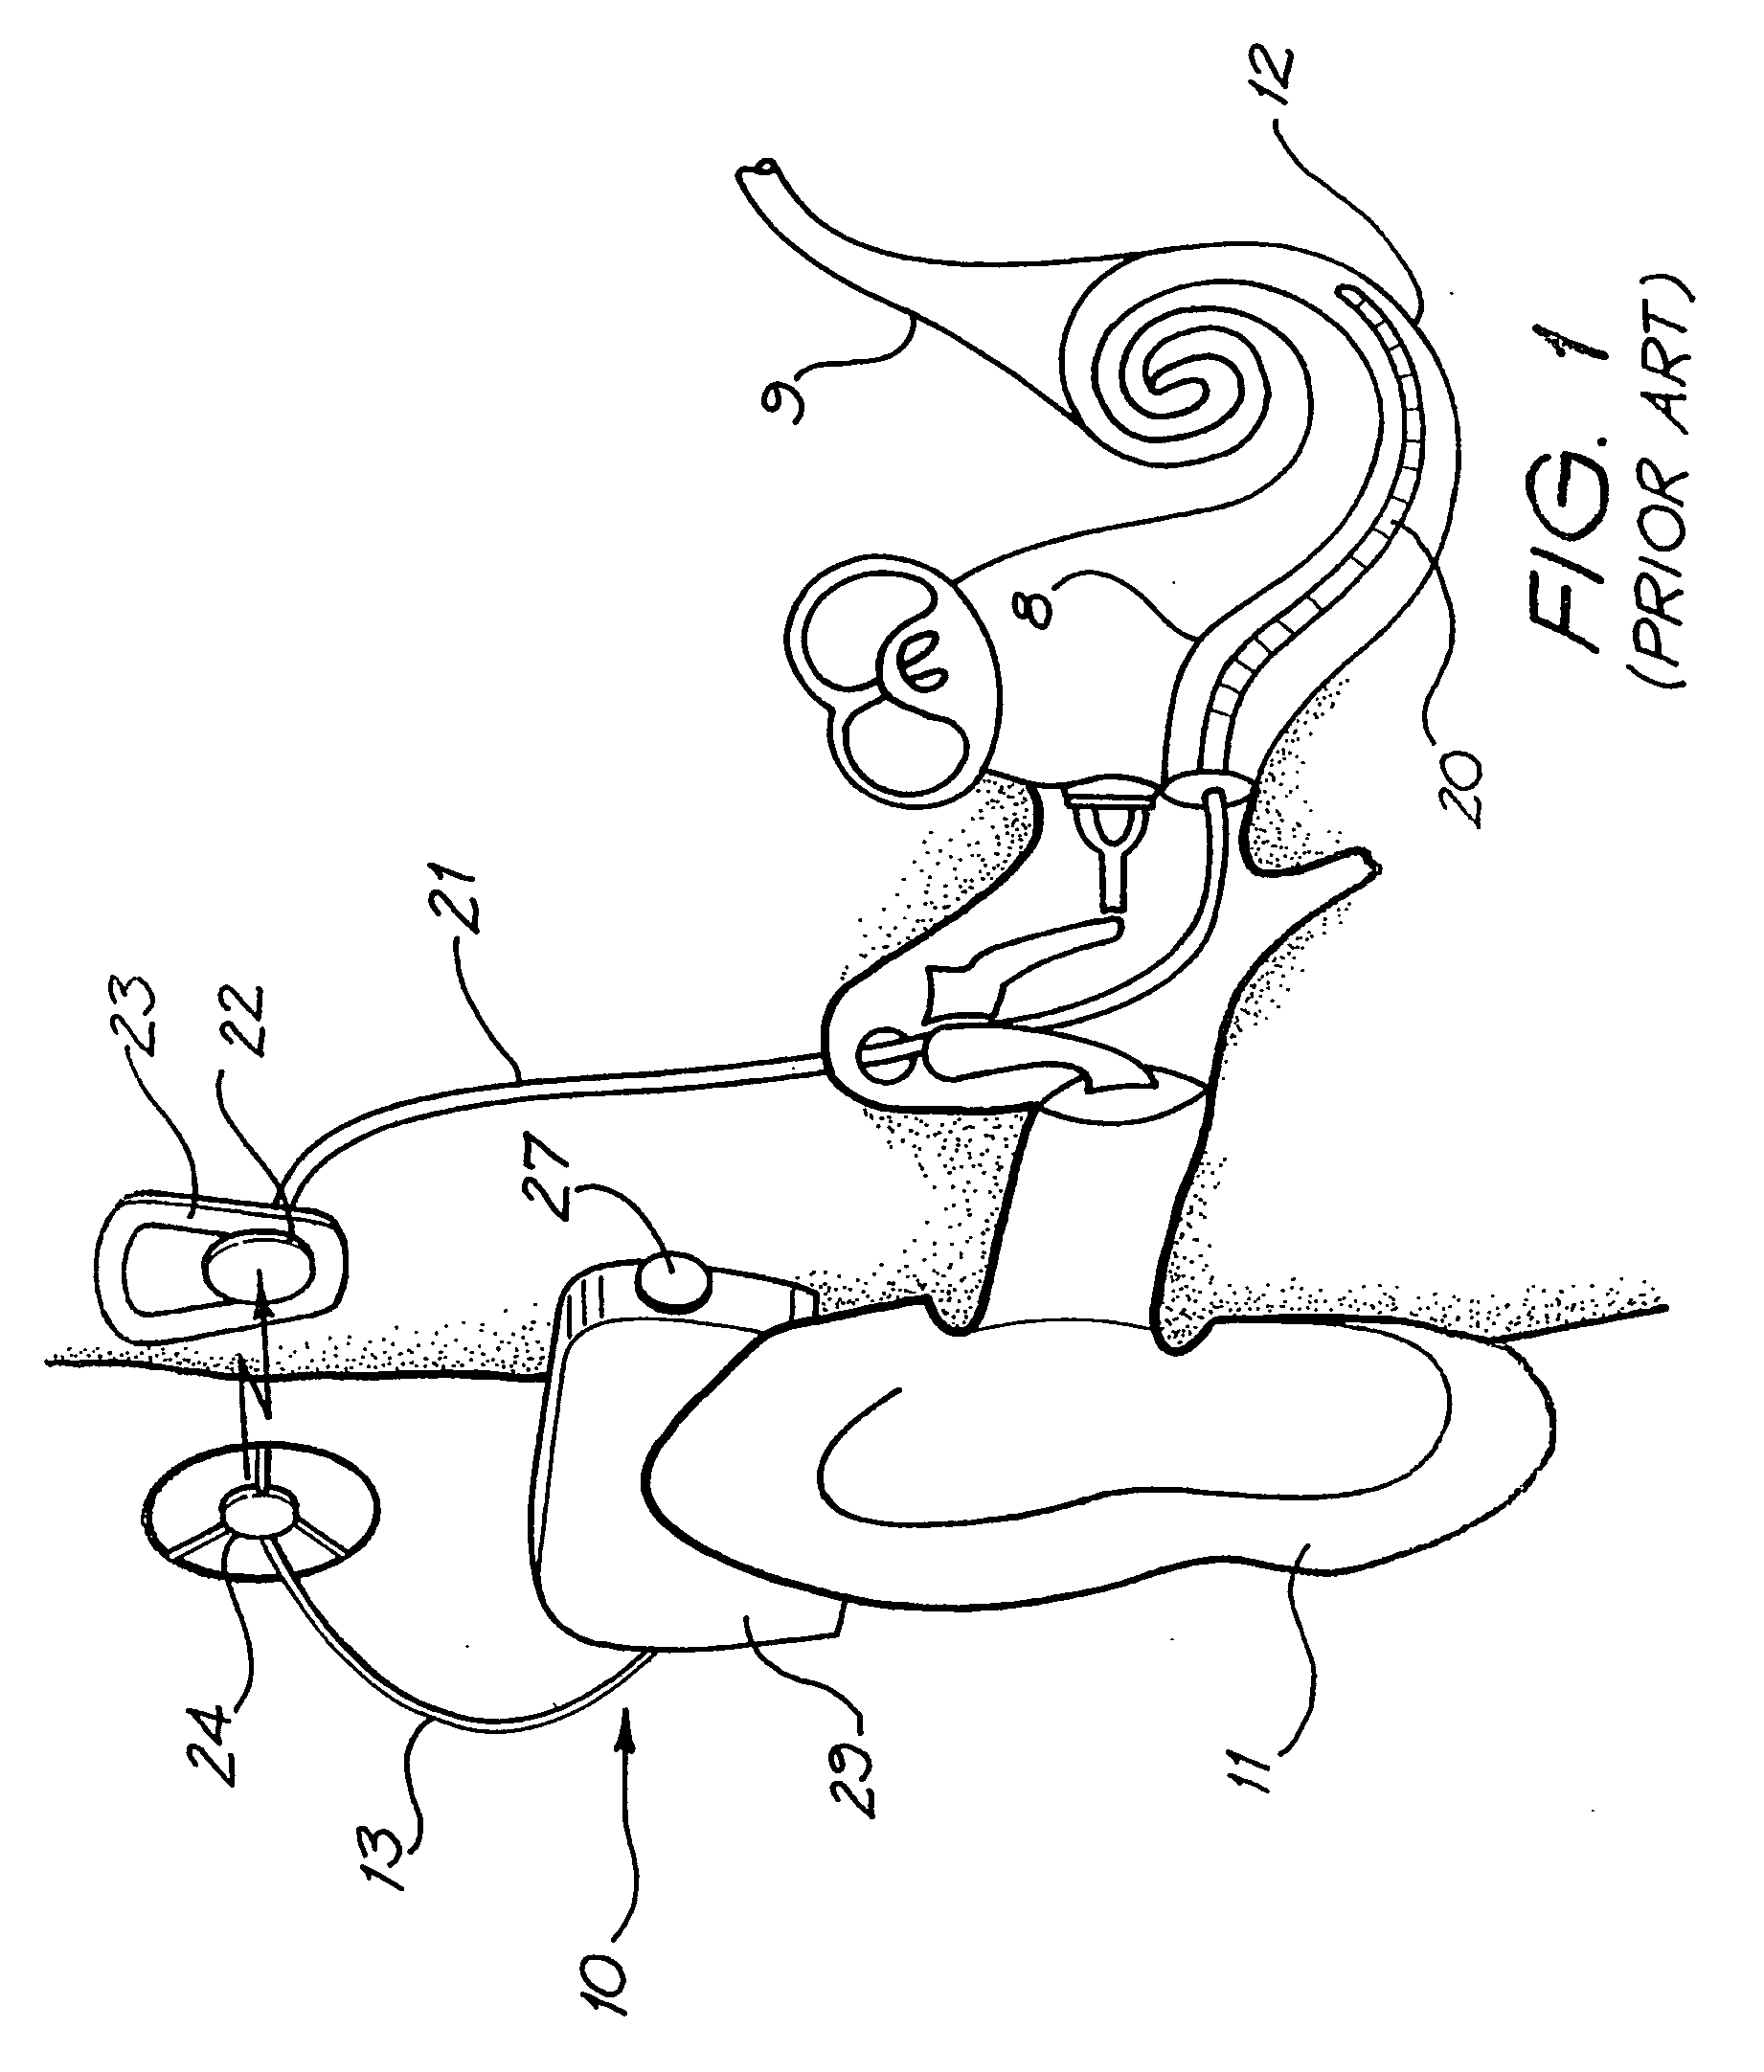 Fixation system for an implantable medical device